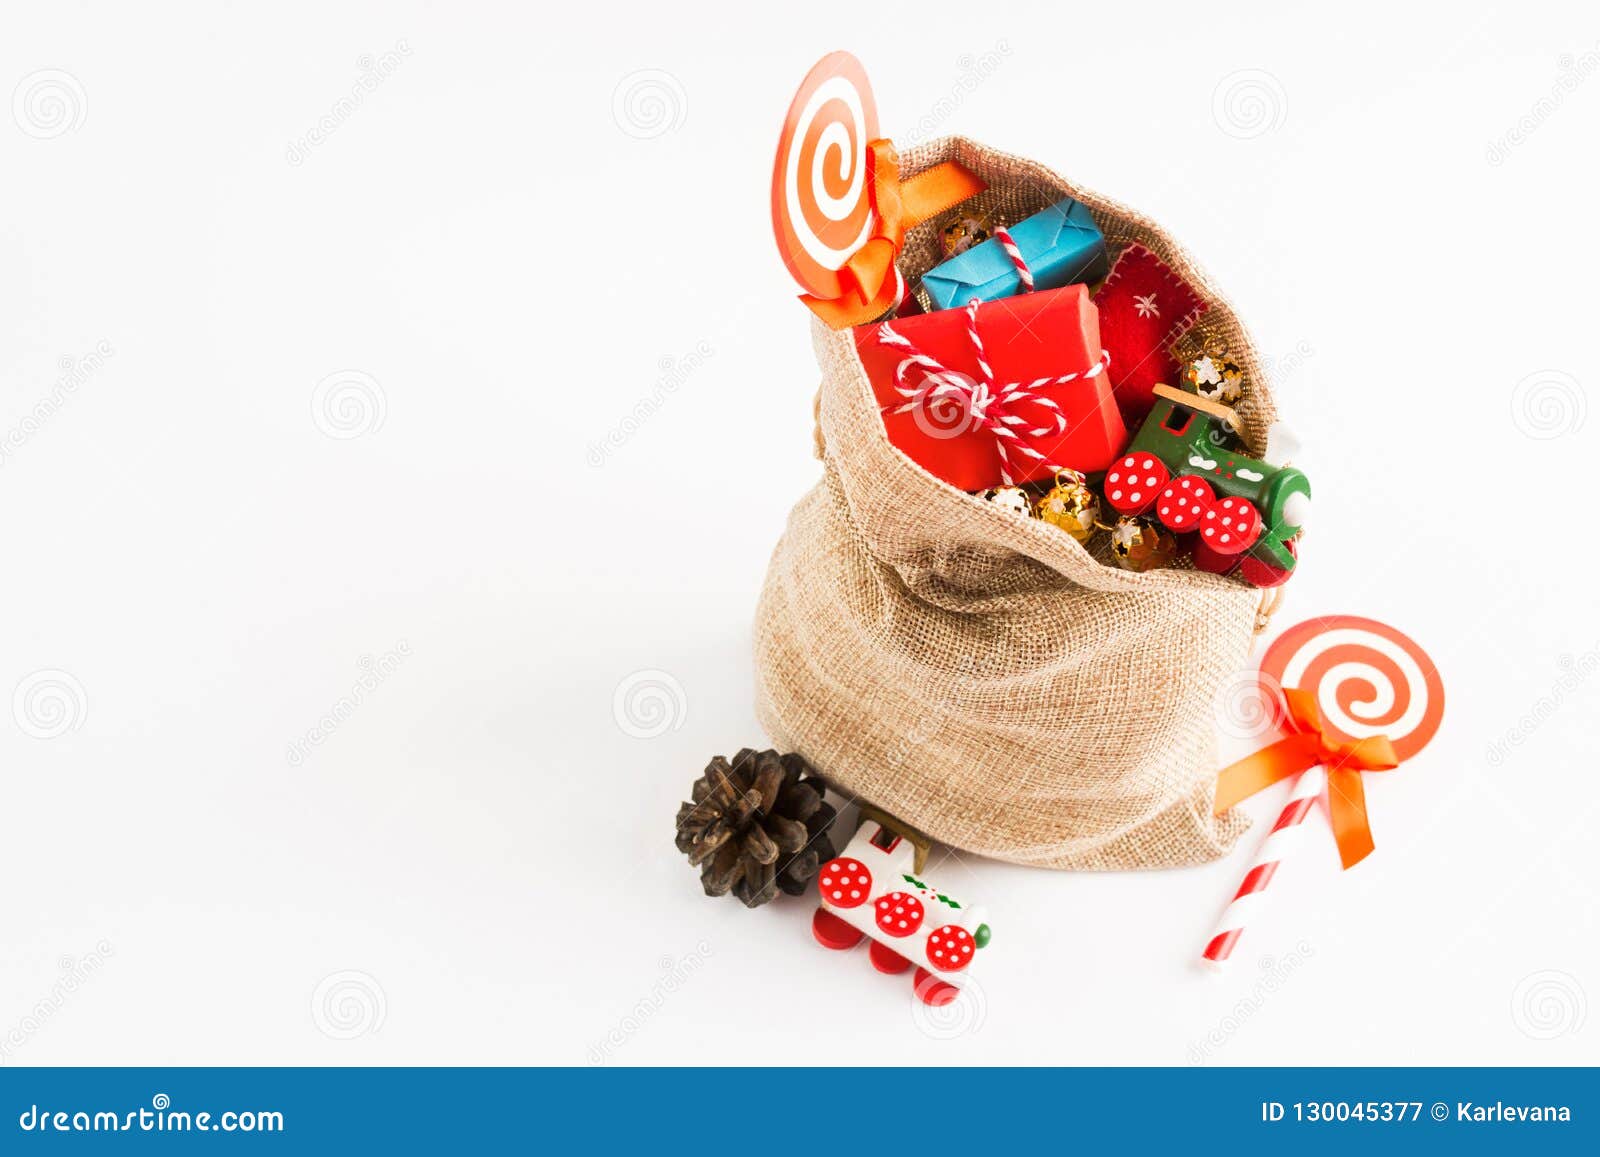 Craft Material Santa`s Bag with Presents for Christmas Stock Image ...